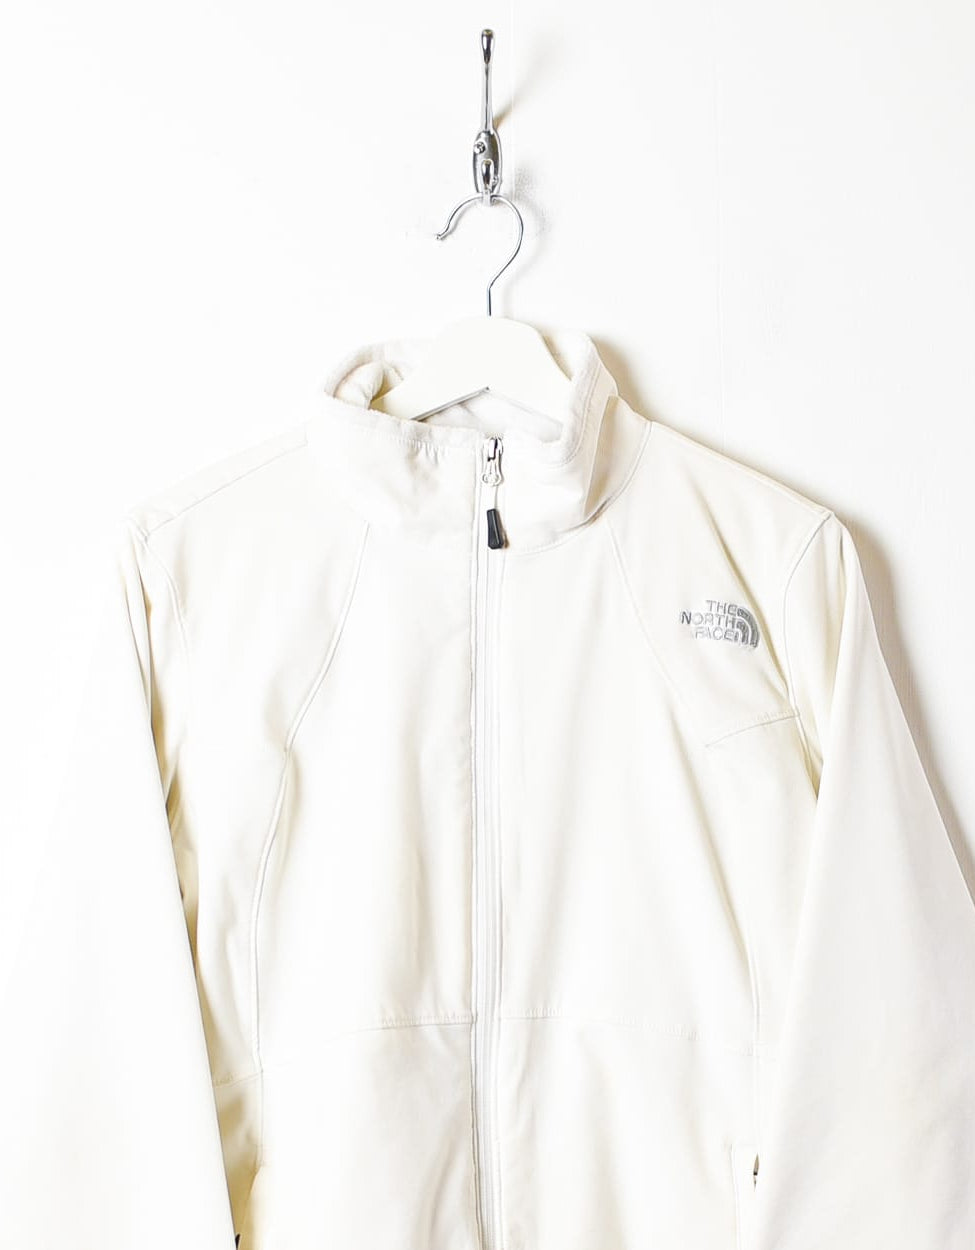 White The North Face Fleece Lined Jacket - Large Women's